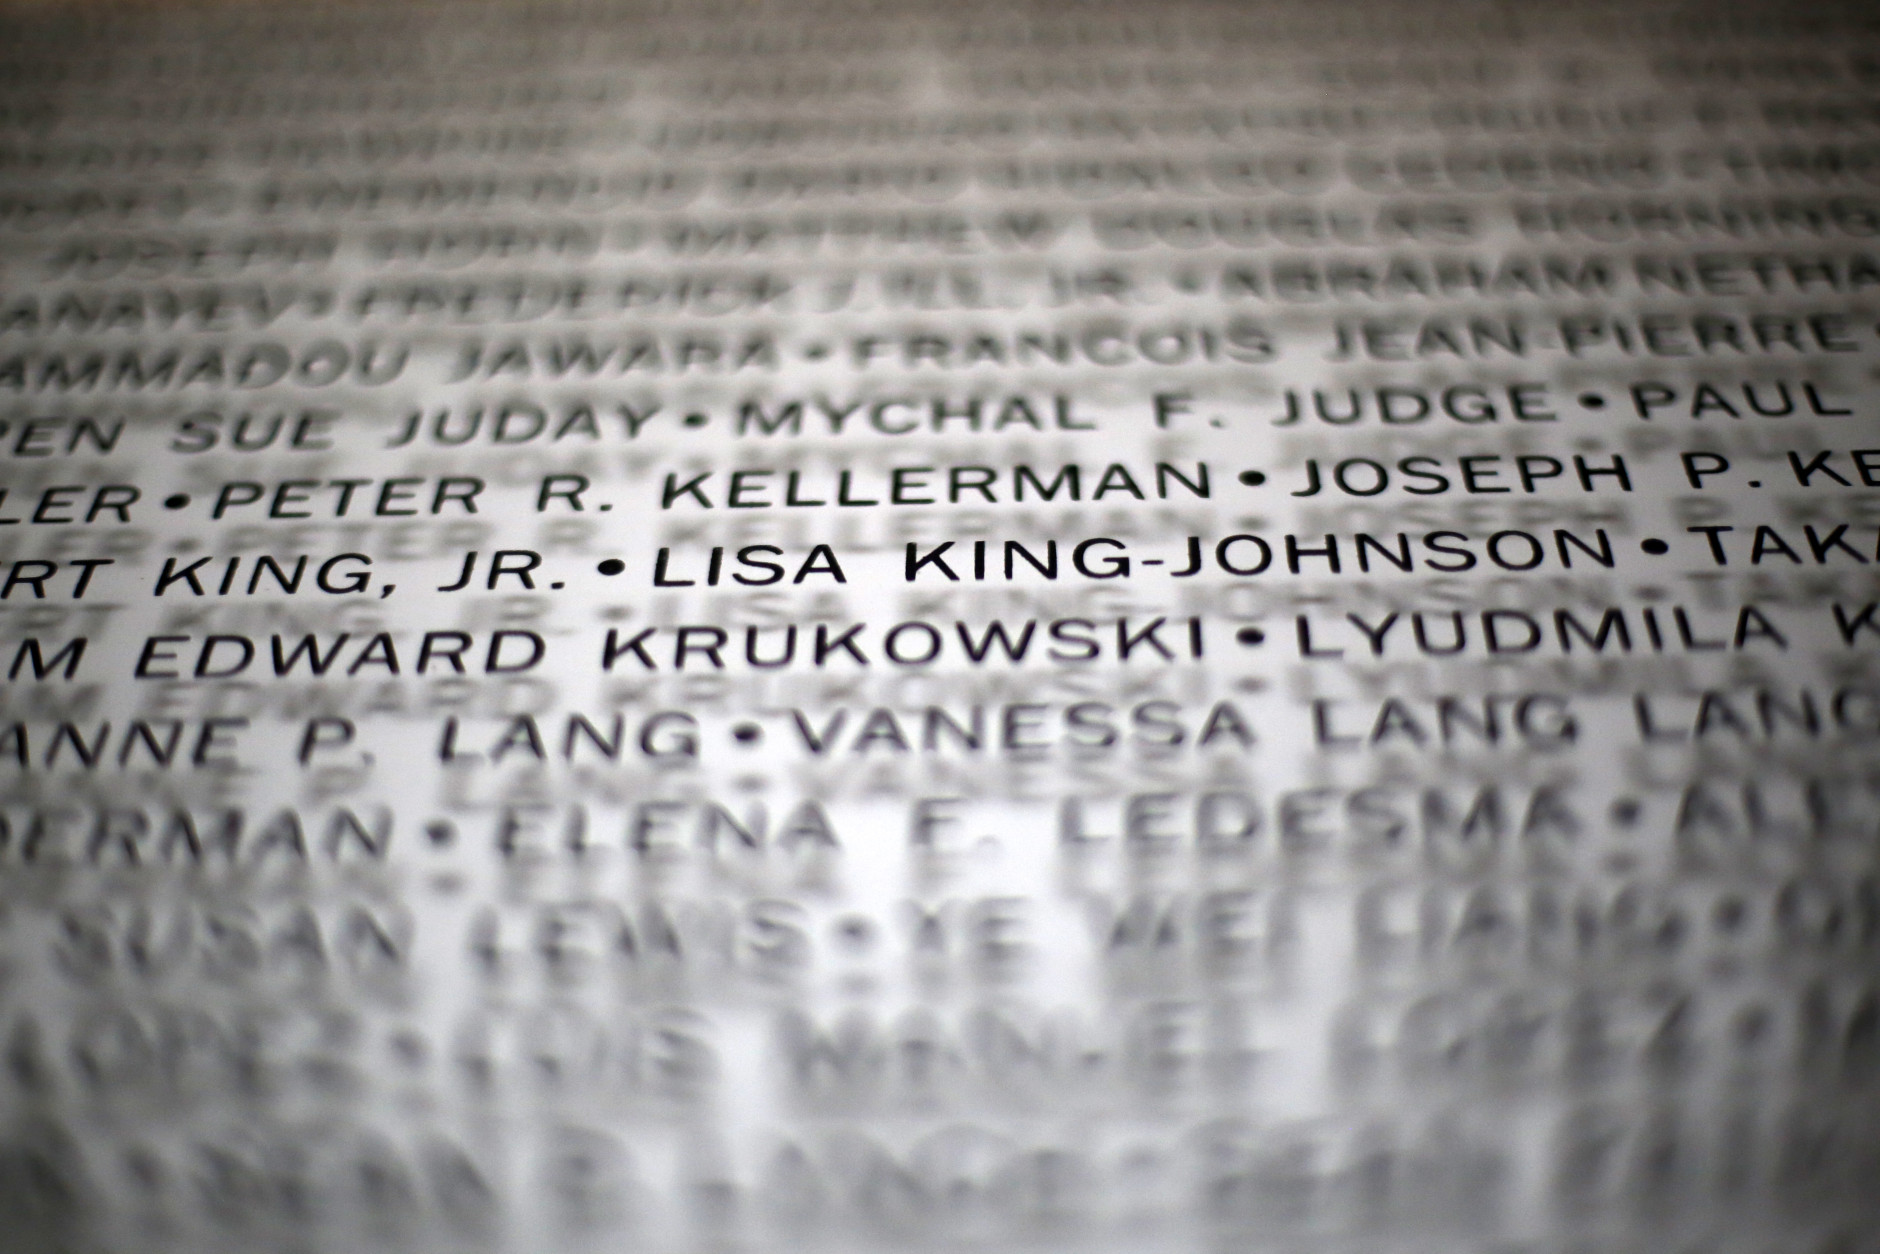 This is a wall of the names of people who lost their lives in the terrorist attacks on Sept. 11, 2001 that are on display as part of the Flight 93 National Memorial Visitors Center Complex in Shanksville, Pa, on Wednesday, Sept. 9, 2015. The visitors center will be formally dedicated and open to the public on Sept. 10, 2015. (AP Photo/Gene J. Puskar)